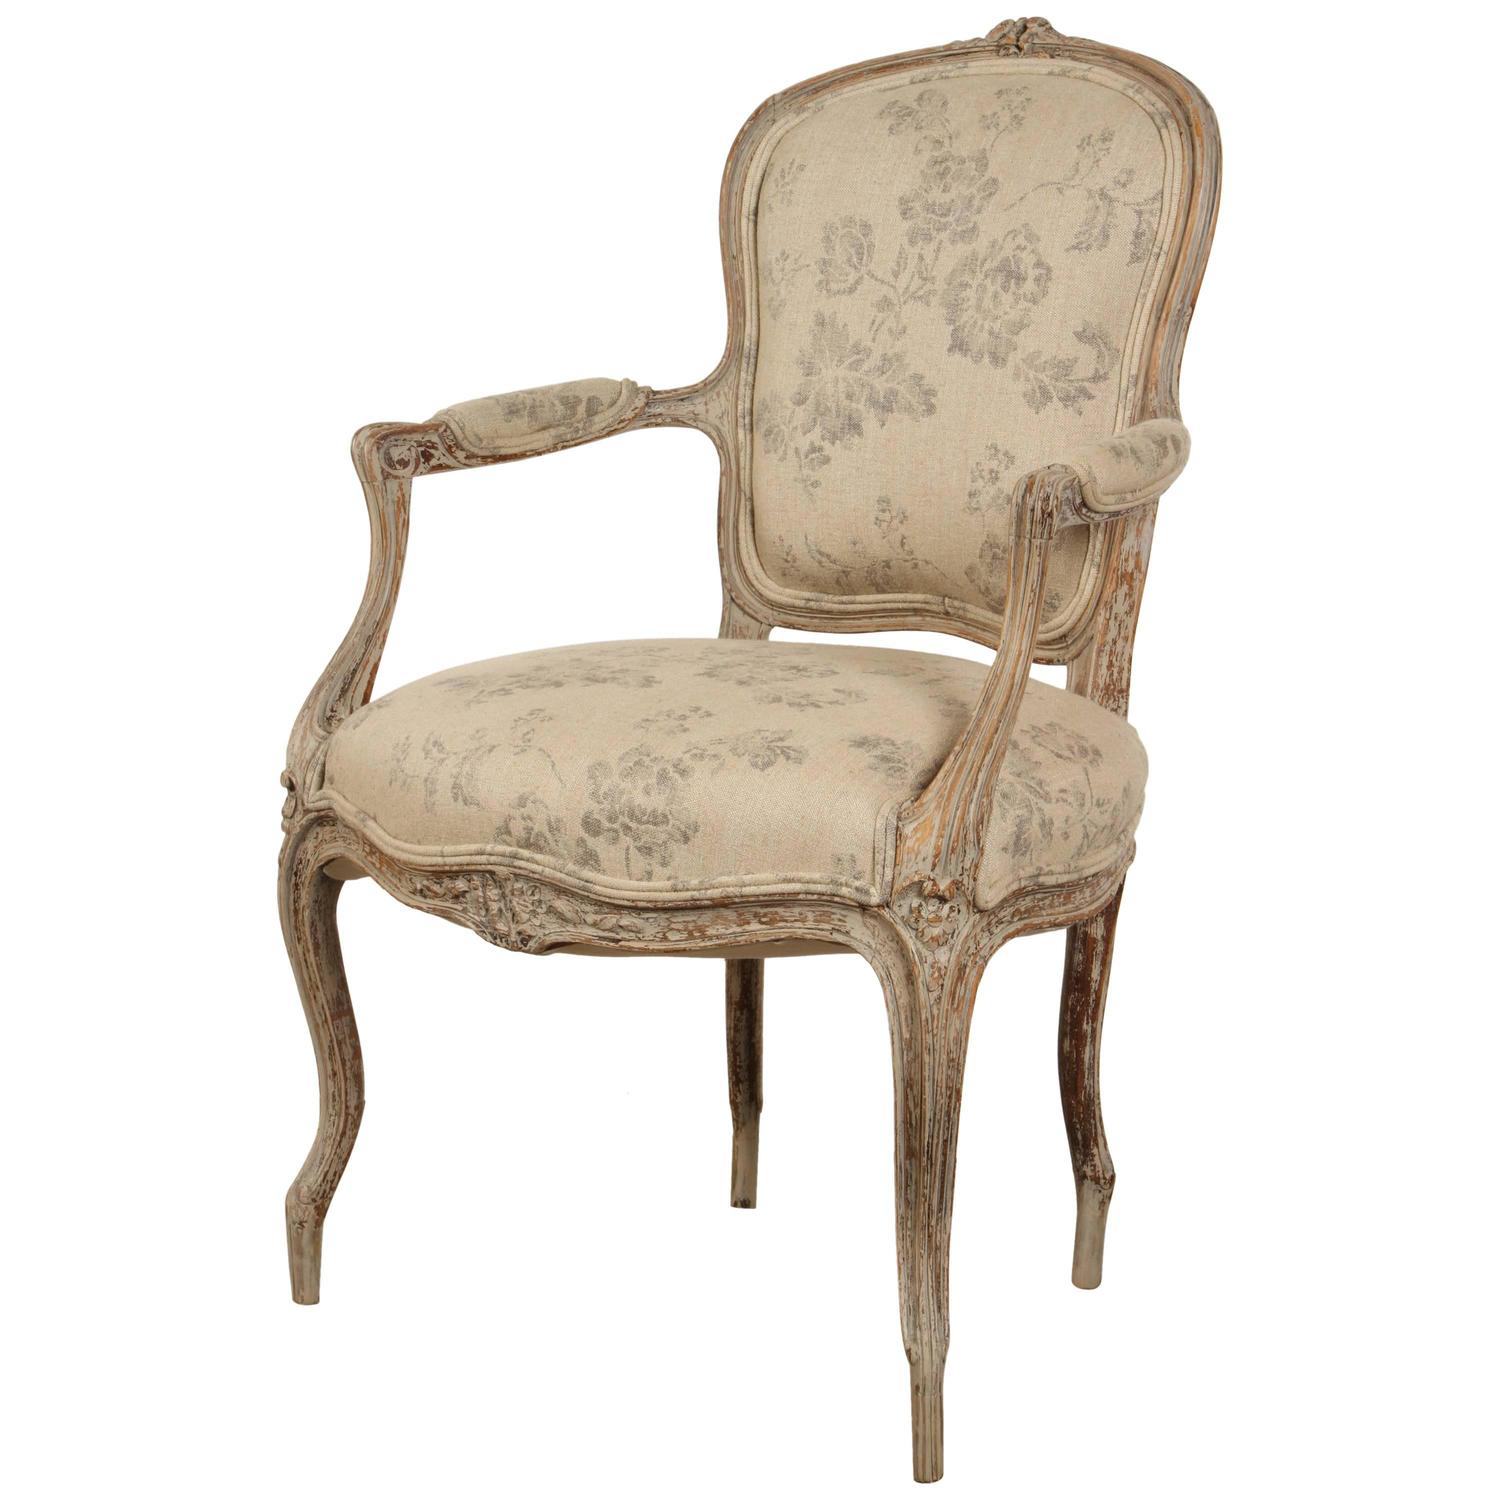 Elegant French Rococo Chair For Sale at 1stdibs french rococo furniture